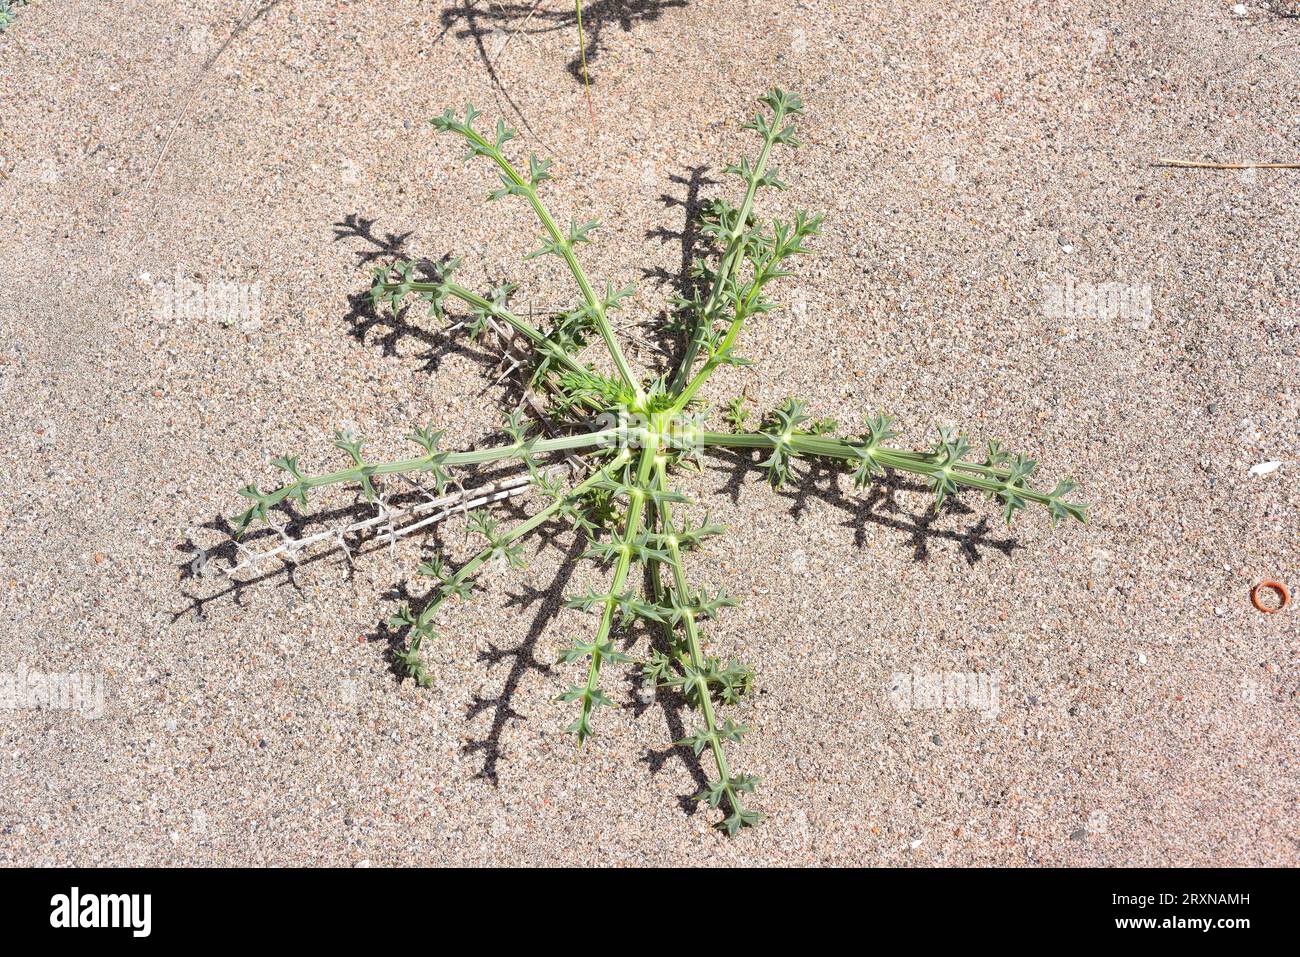 Prickly parsnip (Echinophora spinosa) is a perennial spiny plant native to western Mediterranean basin coasts. Young specimen. This photo was taken in Stock Photo